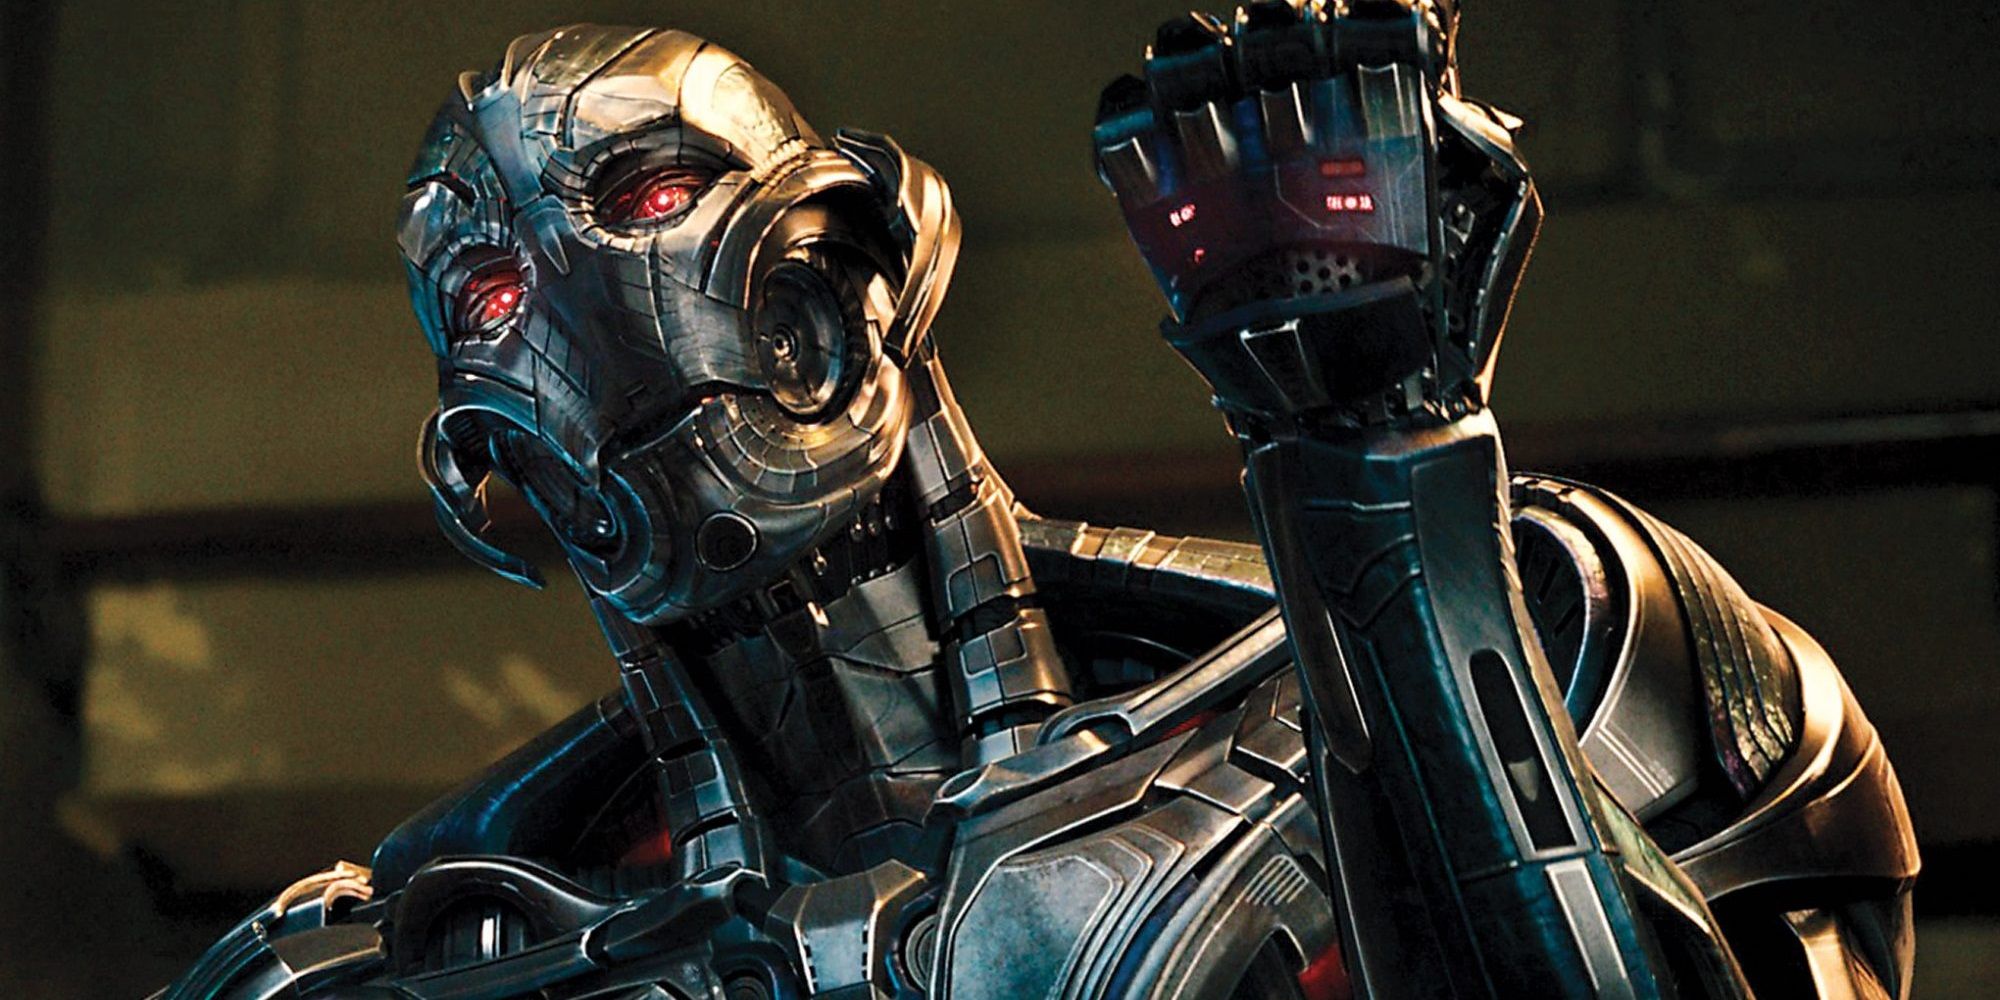 Ultron clenching a fist in Avengers Age of Ultron